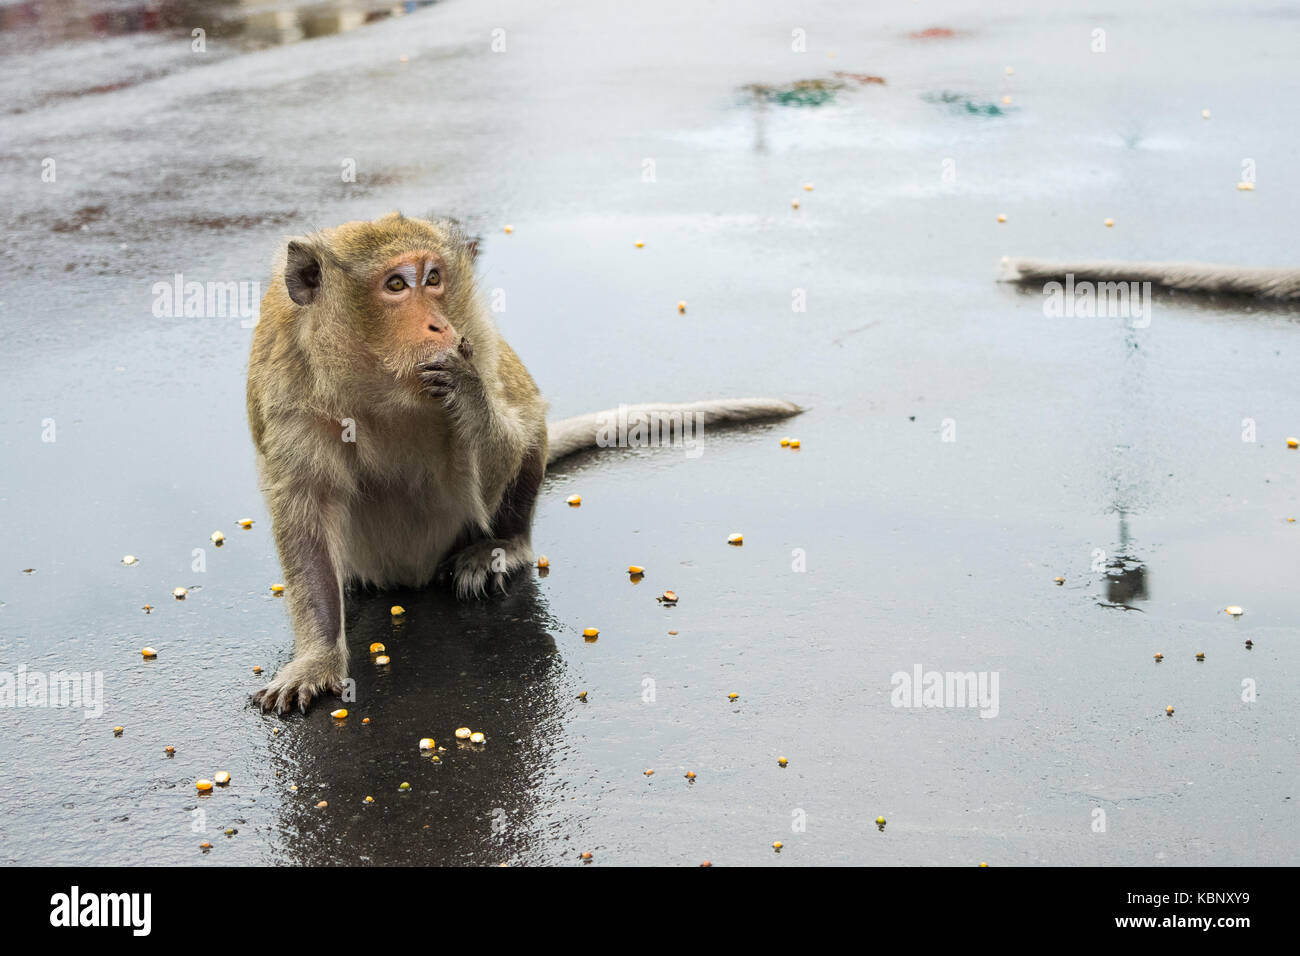 A macaque monkey slowly nibbling on corn seeds with its hands in front of its mouth. Monkey fed by tourists in Phnom Penh, Cambodia, South East Asia Stock Photo